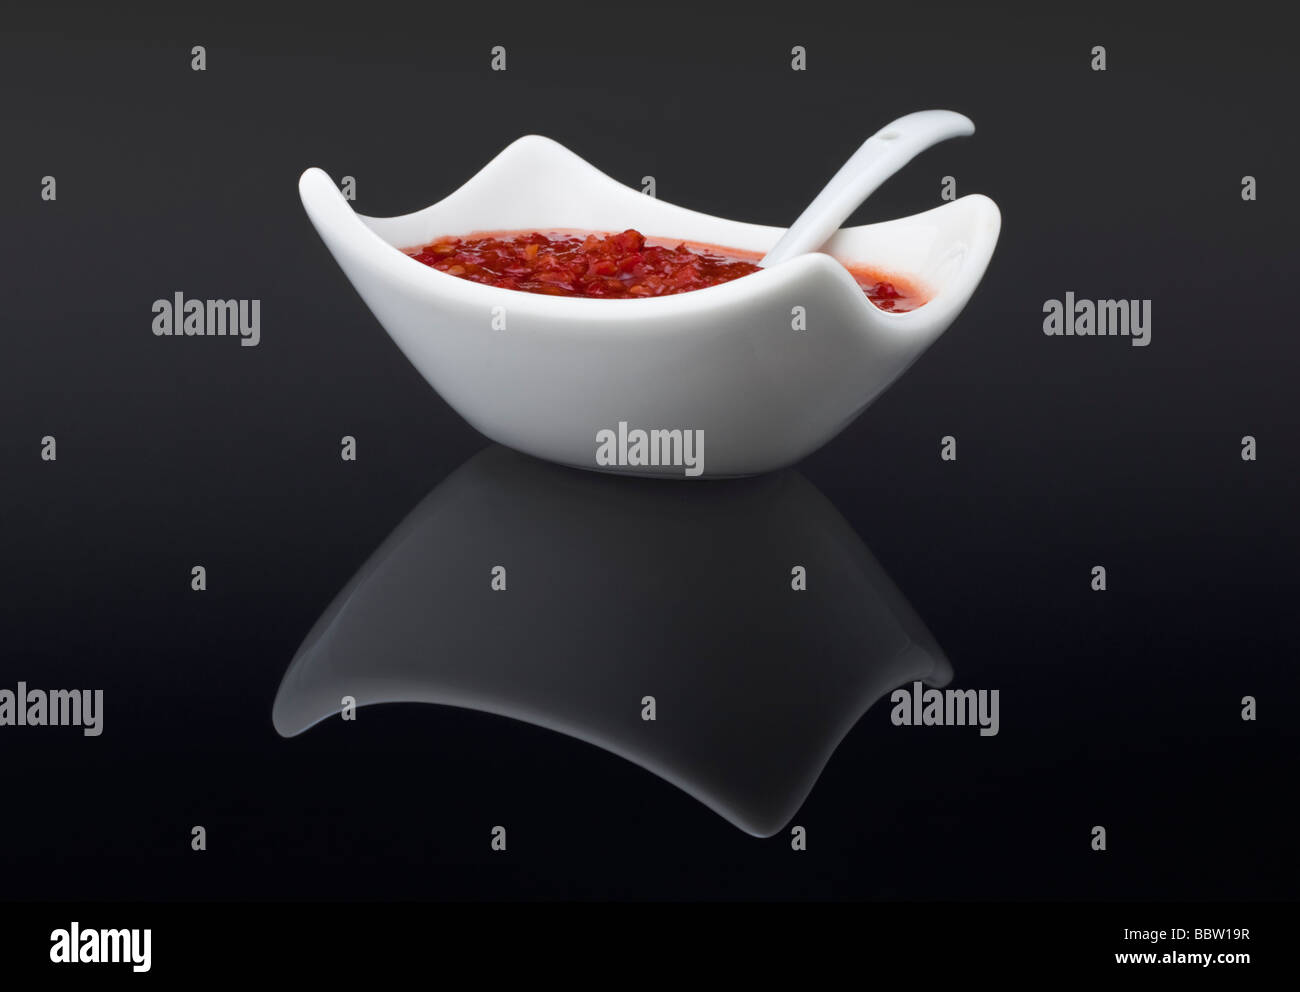 Chilli sauce in a white dish with serving spoon Stock Photo